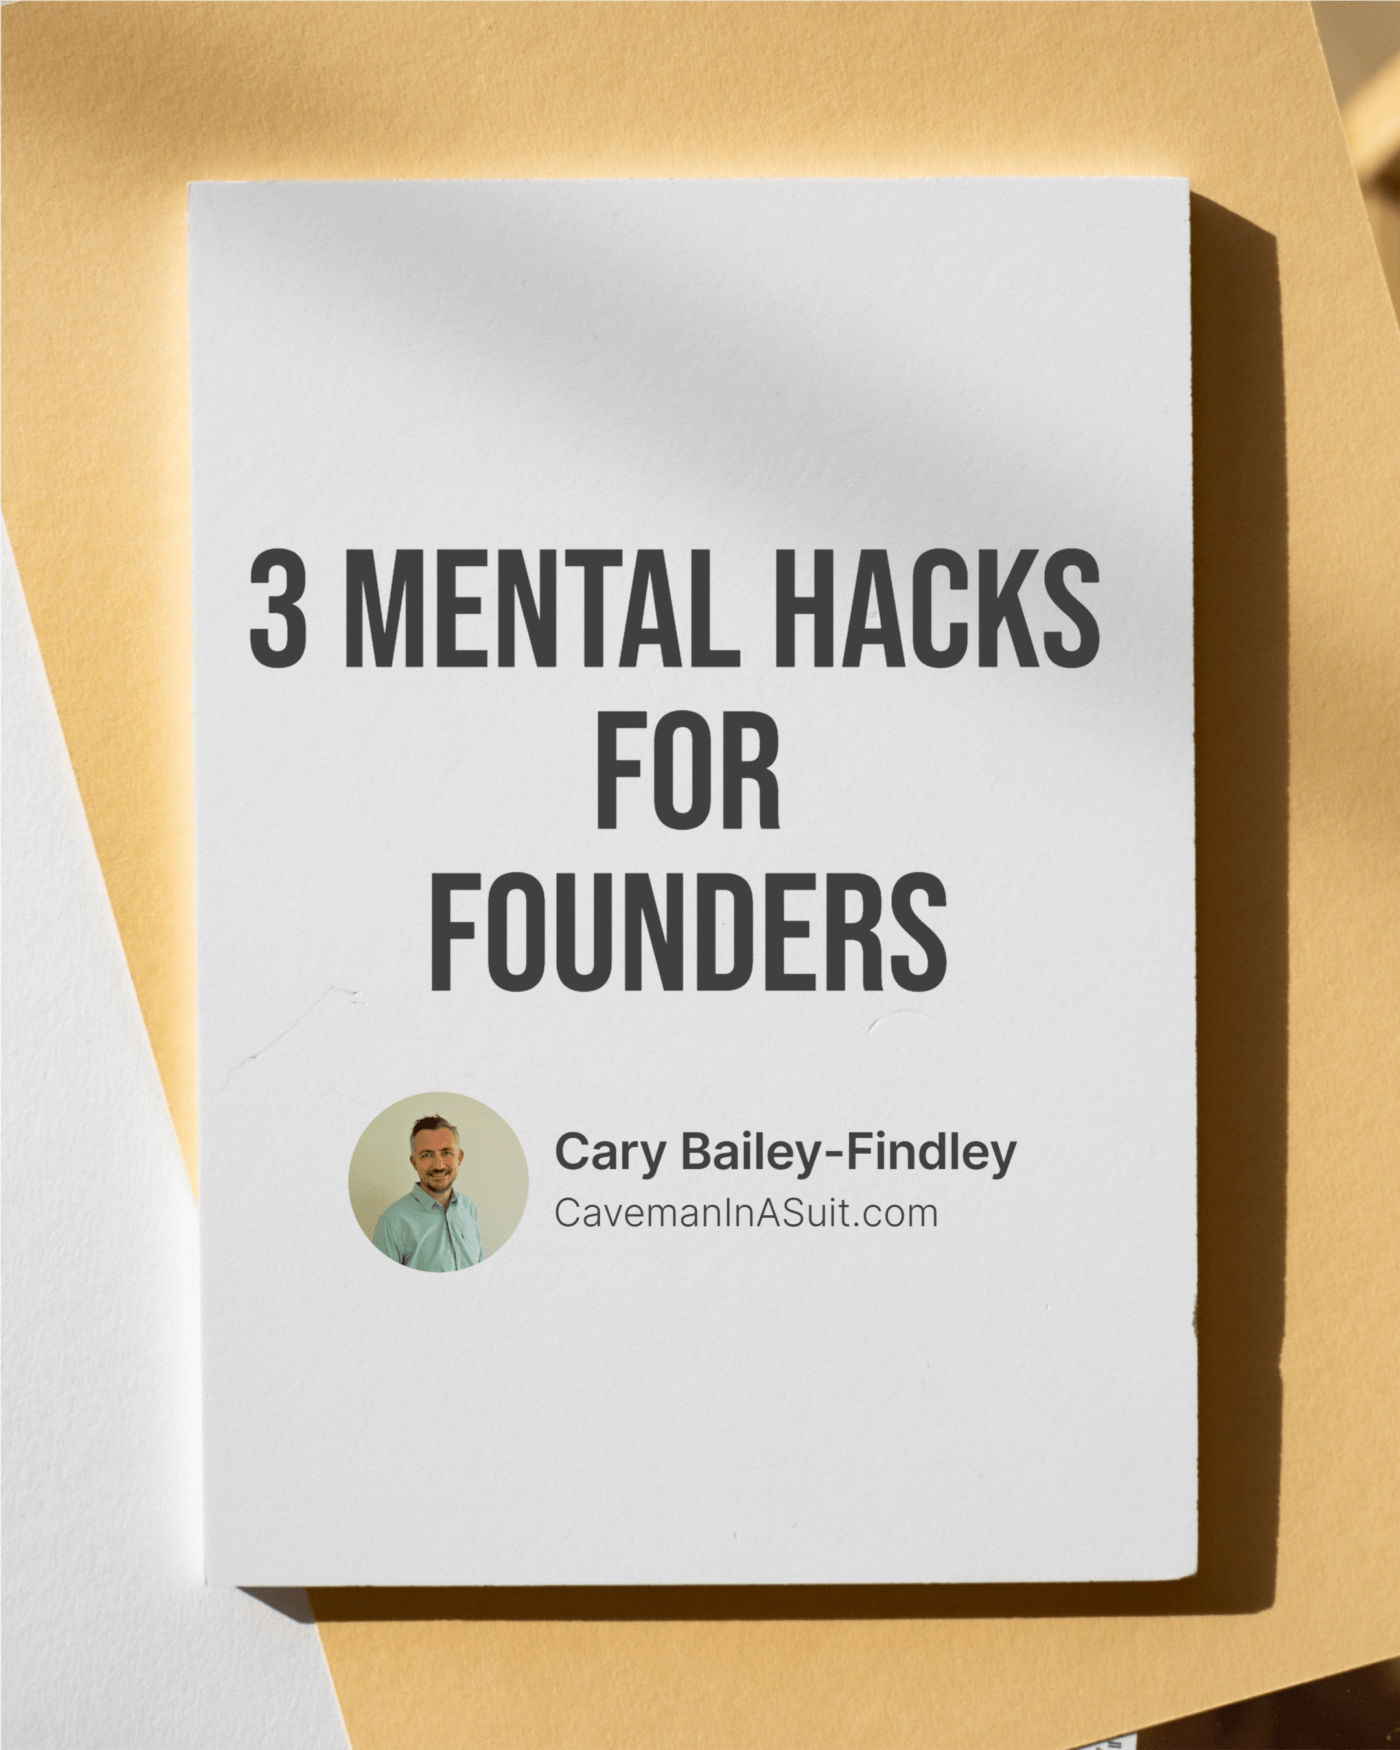 3 Mental Hacks for FOUNDERS - image image-download-1400x1750 on http://cavemaninasuit.com